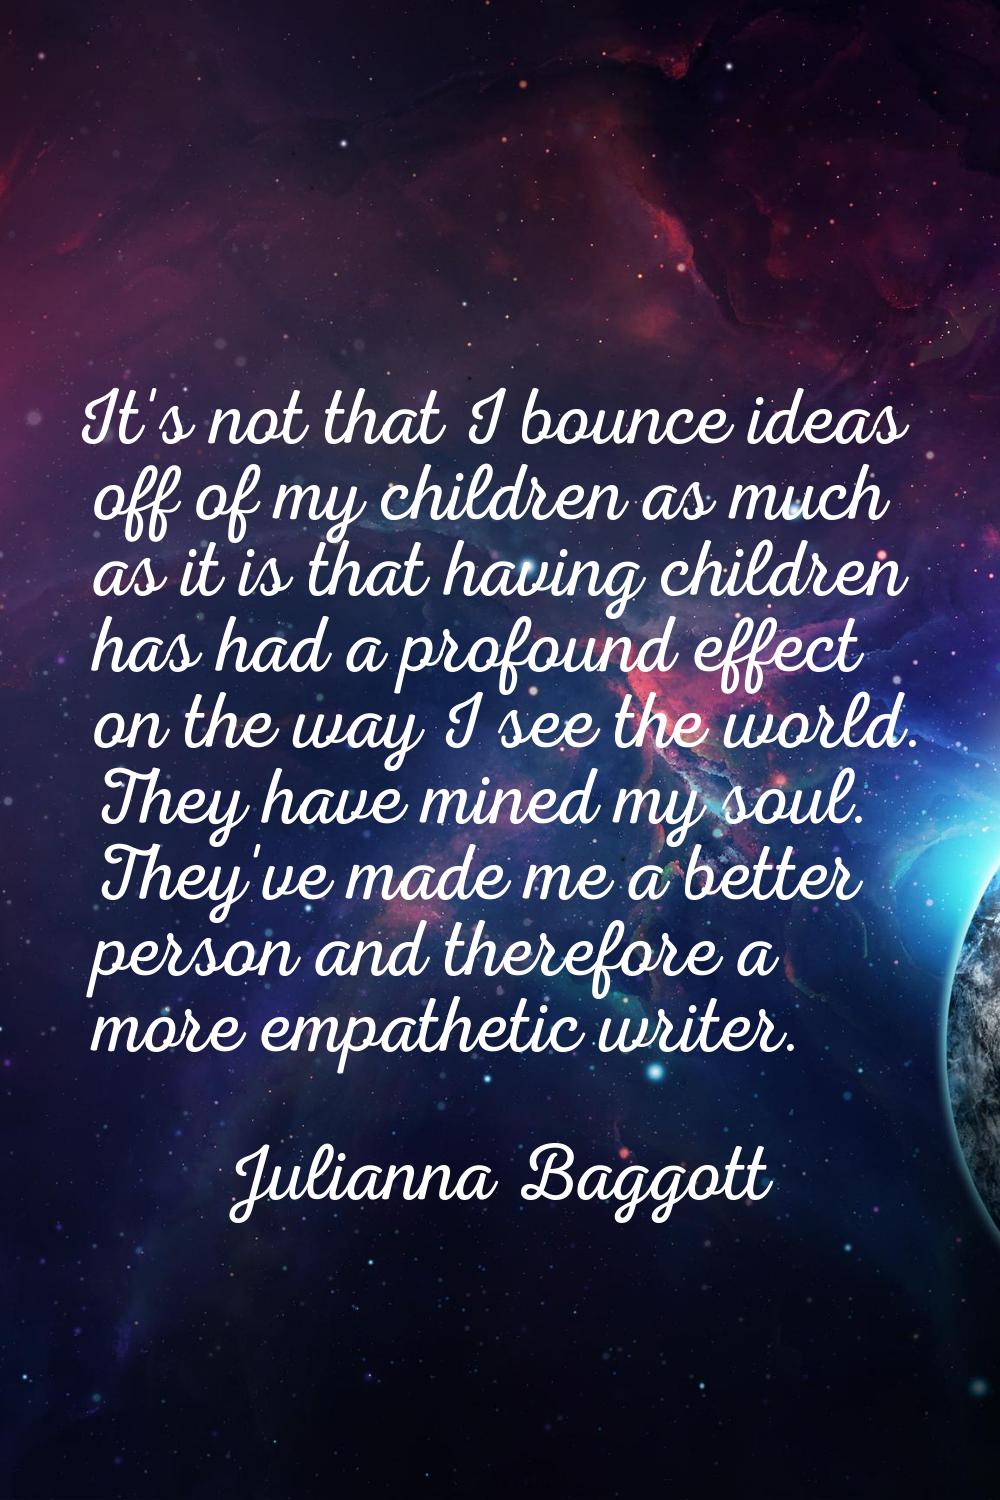 It's not that I bounce ideas off of my children as much as it is that having children has had a pro